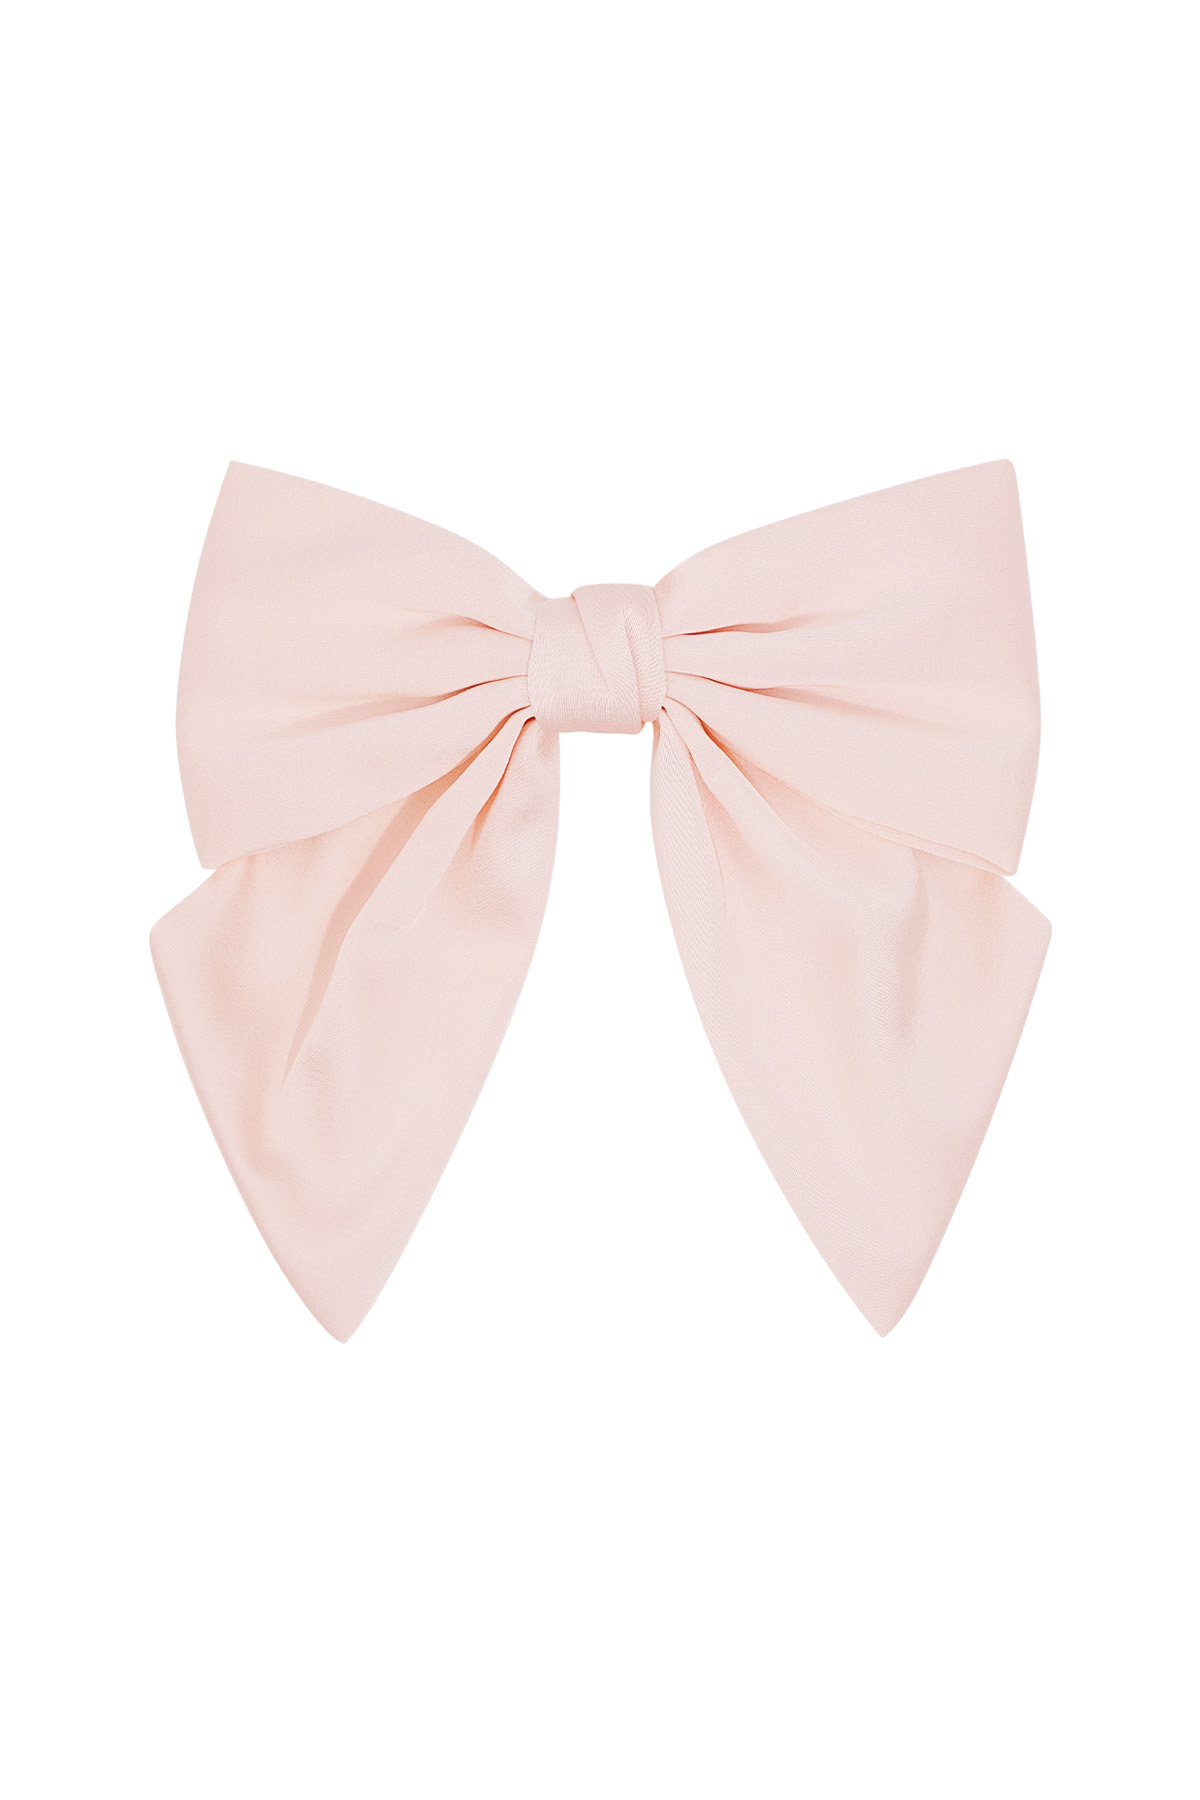 Simple hair bow - light pink